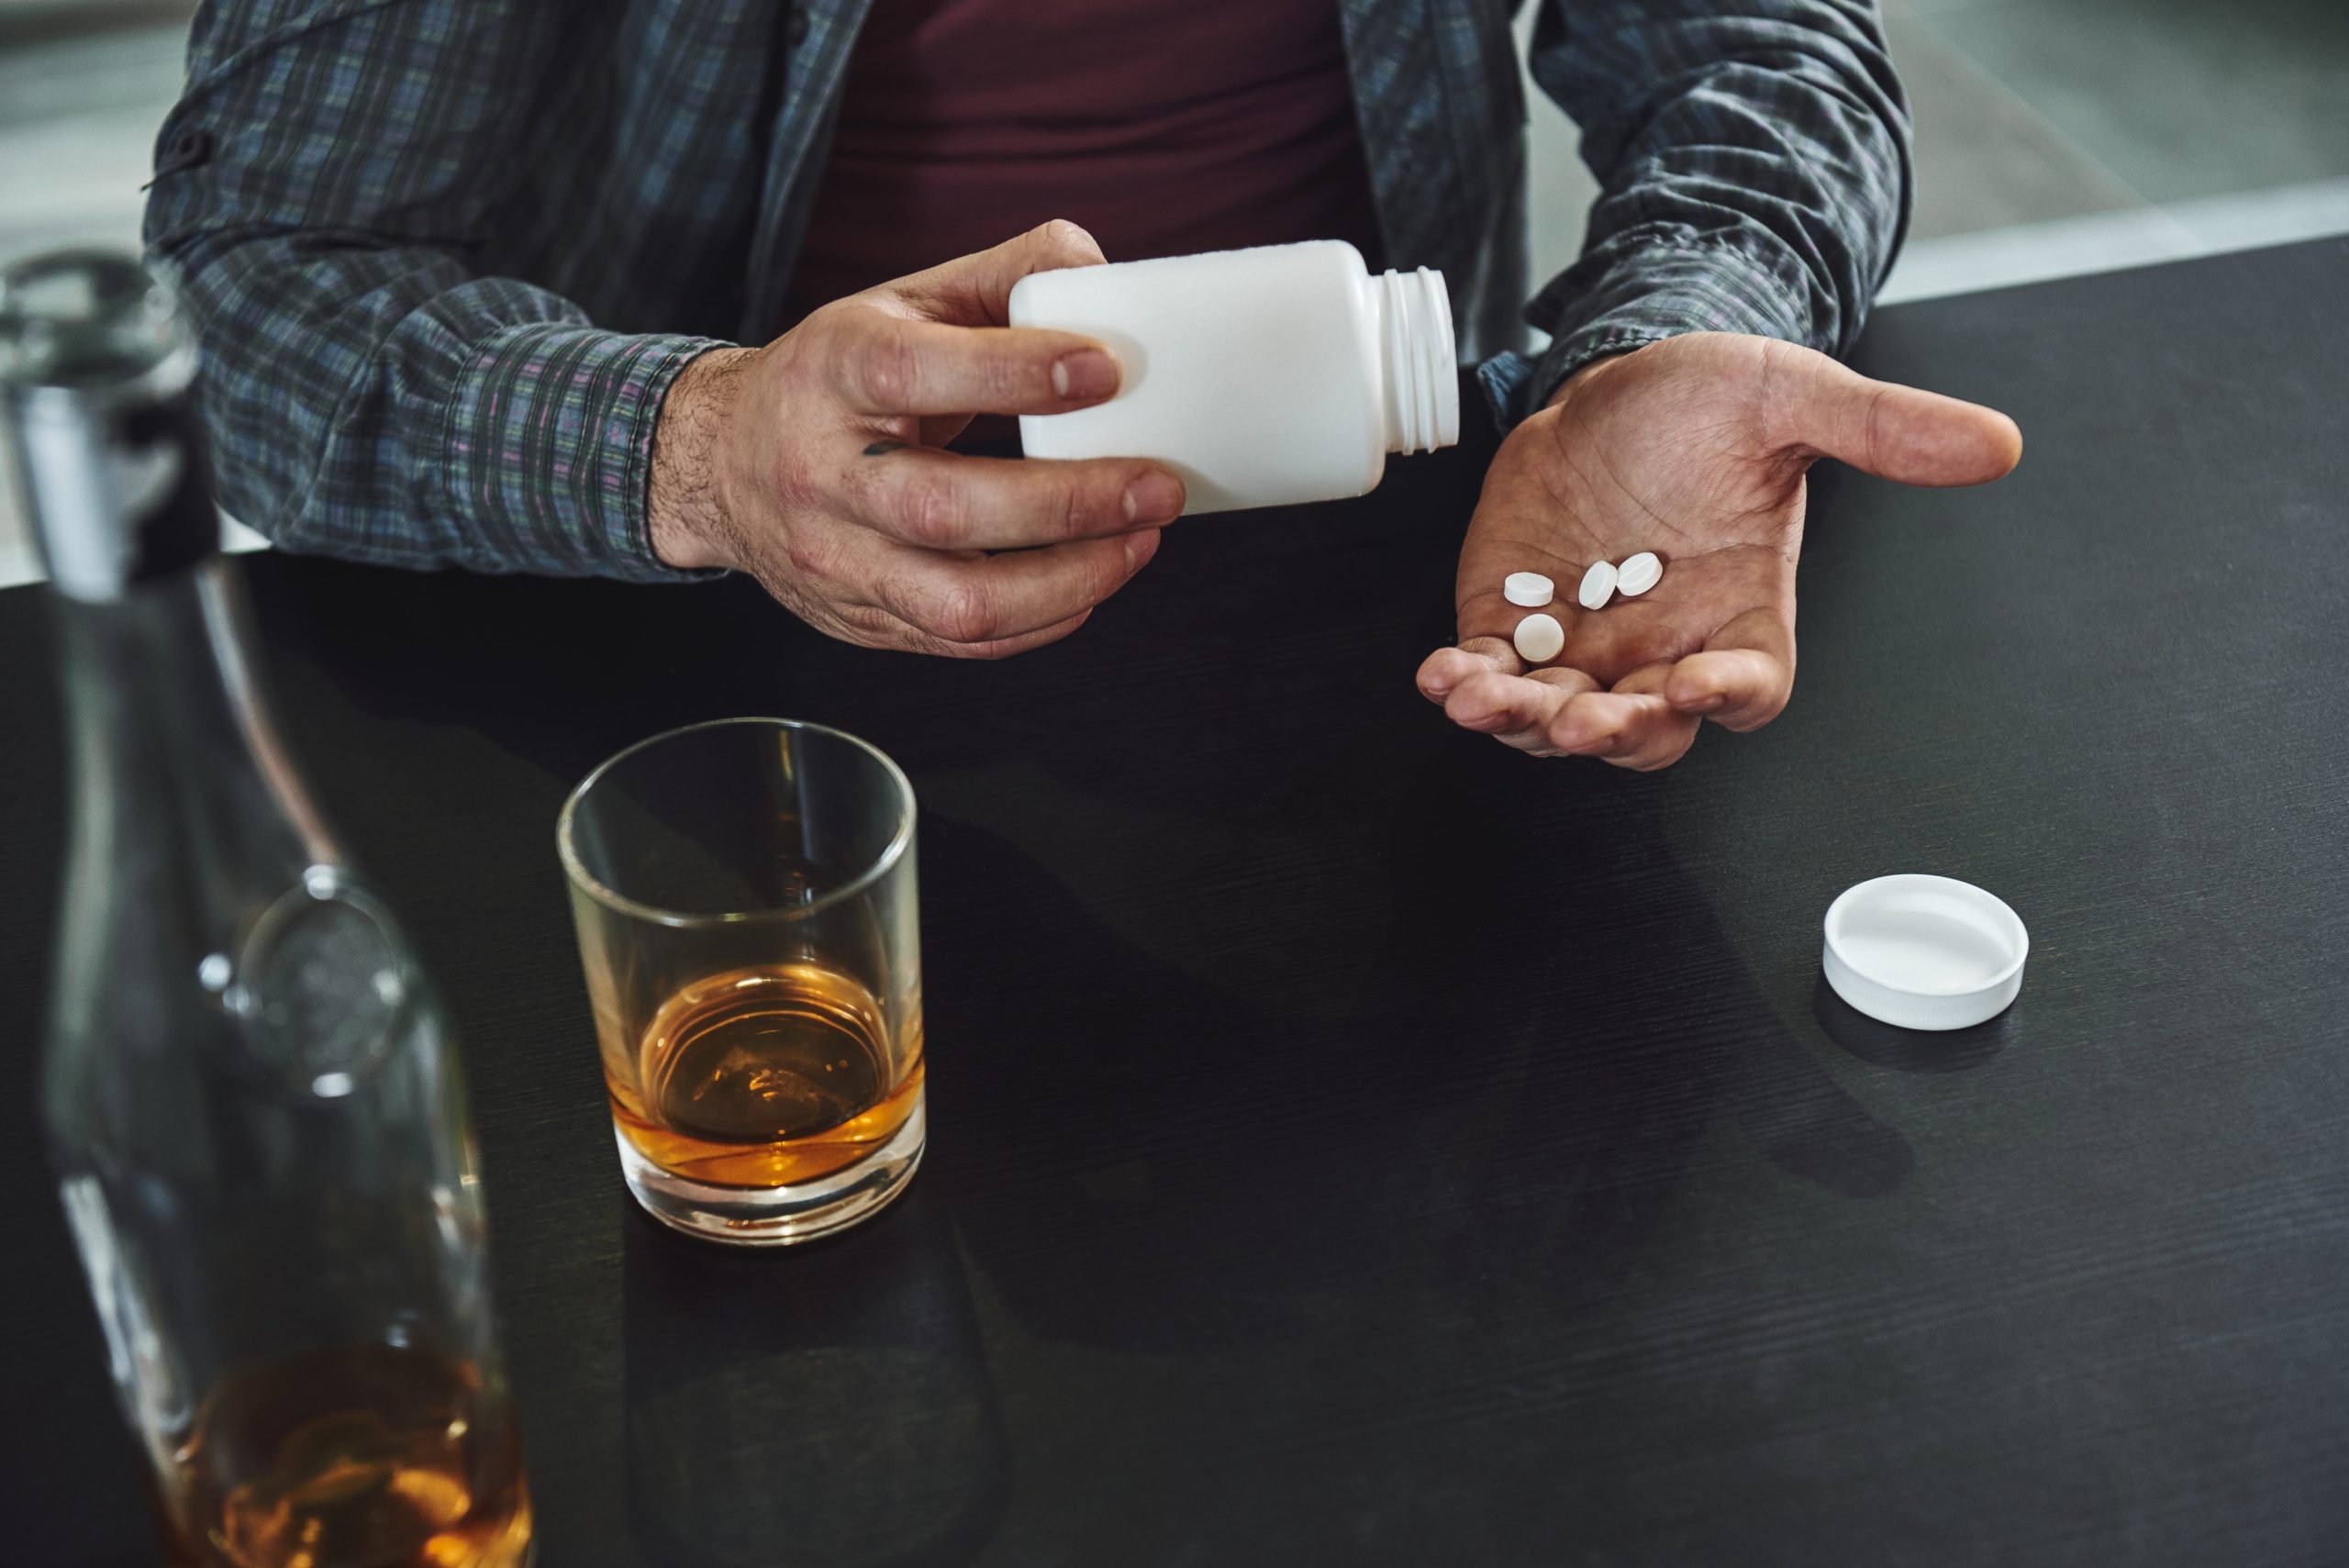 What Happens When You Mix Alcohol and Antidepressants?